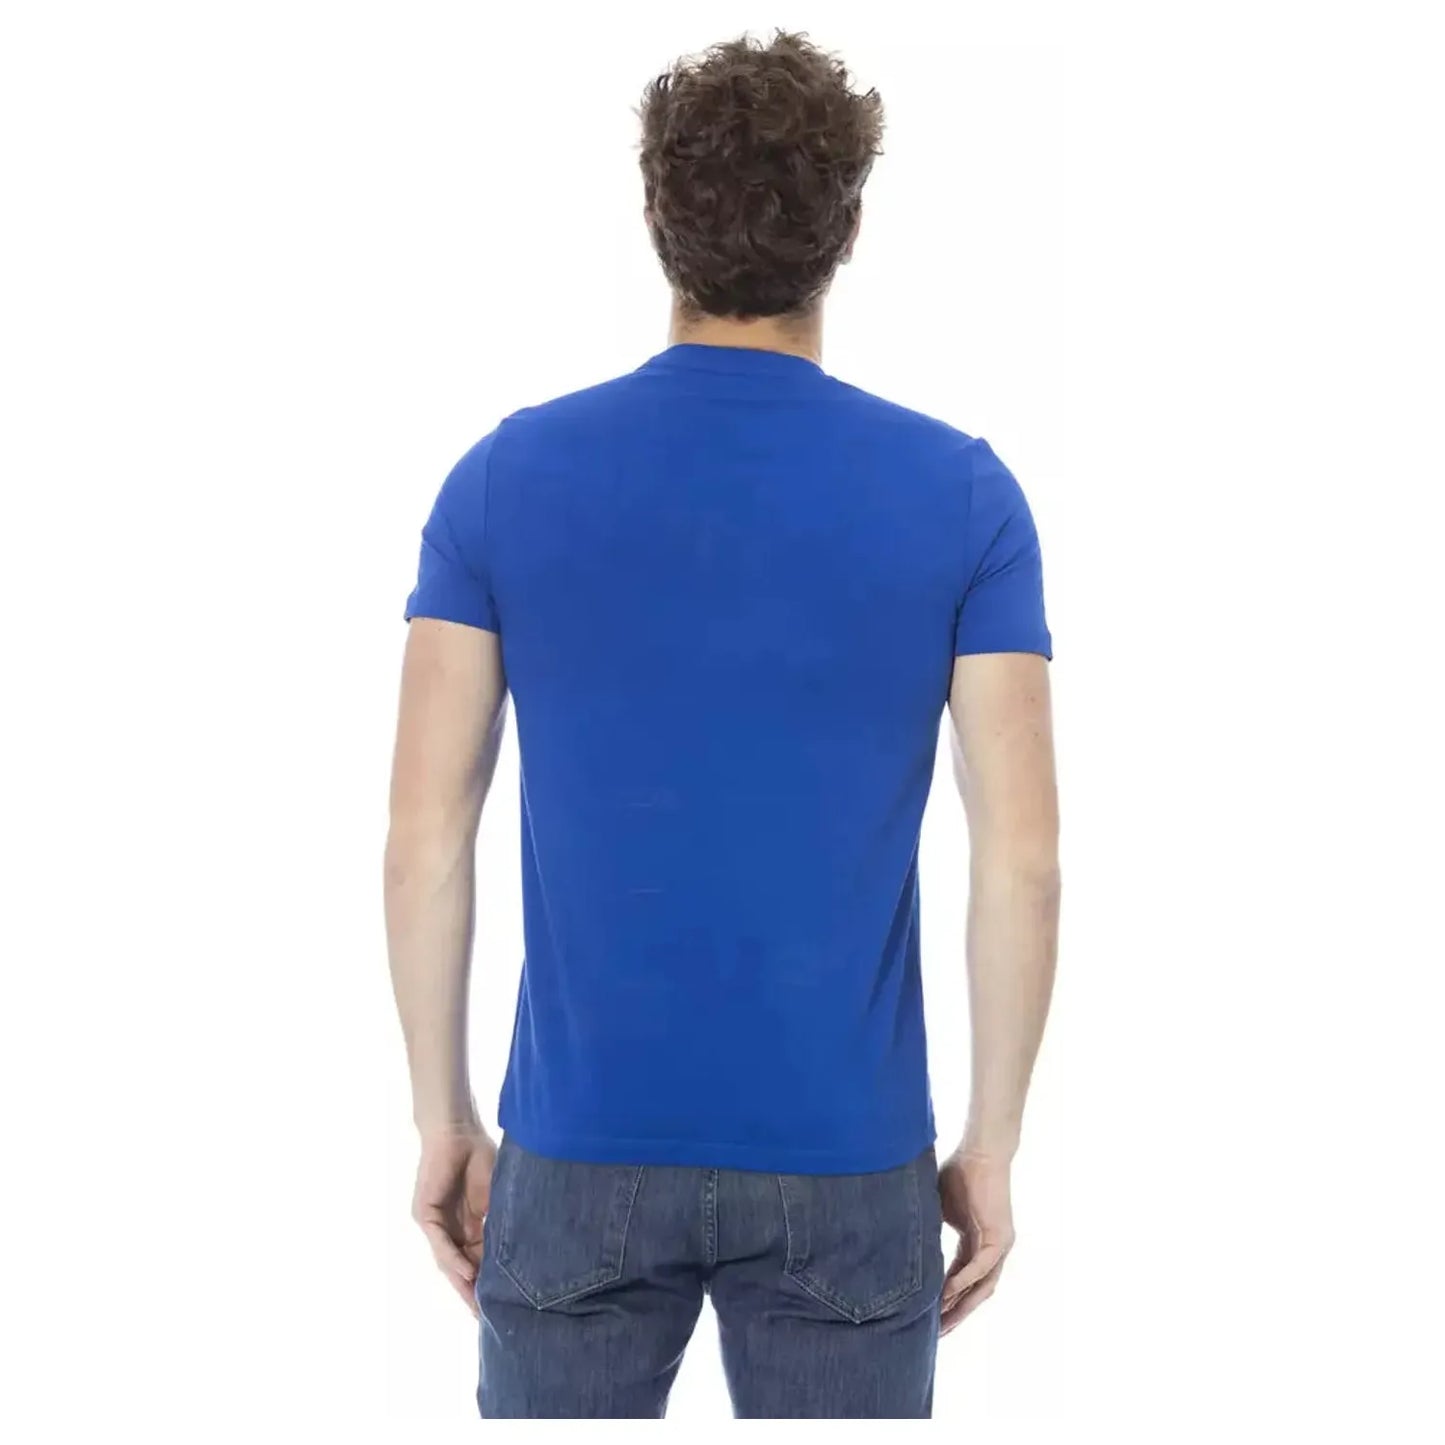 Baldinini Trend Chic Blue Cotton Tee with Front Print blue-cotton-t-shirt-106